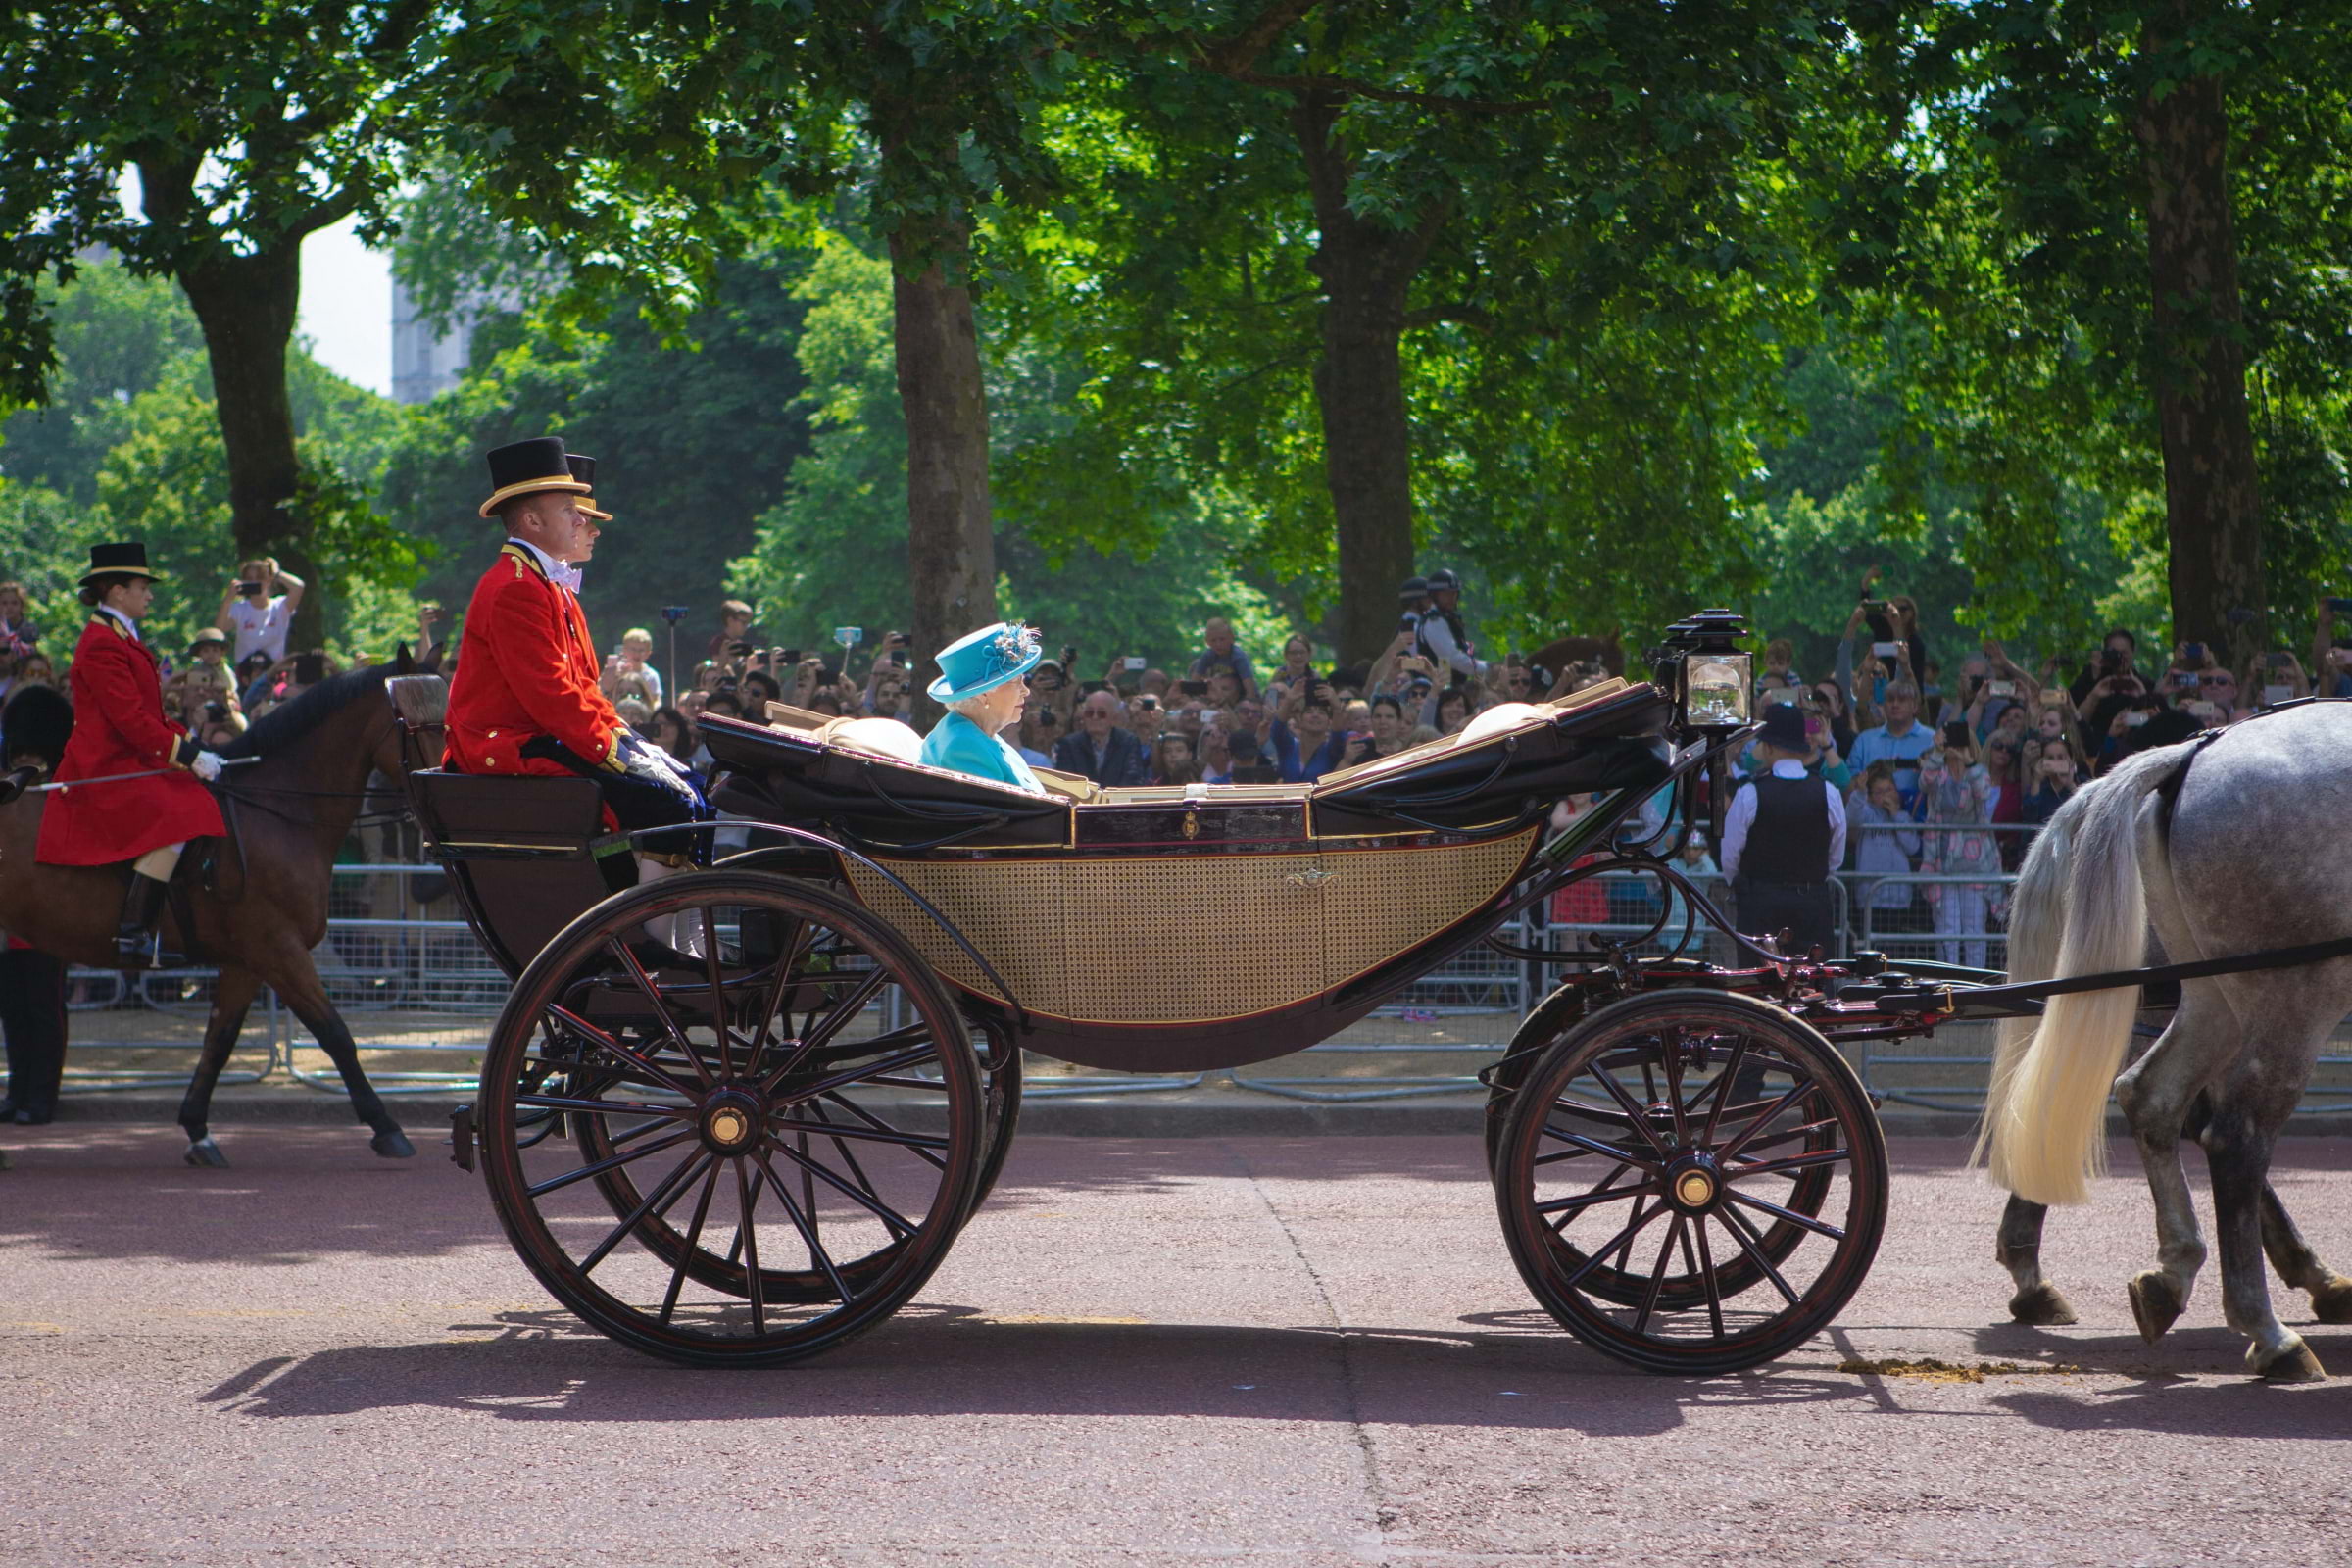 The Queen's funeral: What to expect and look out for in London